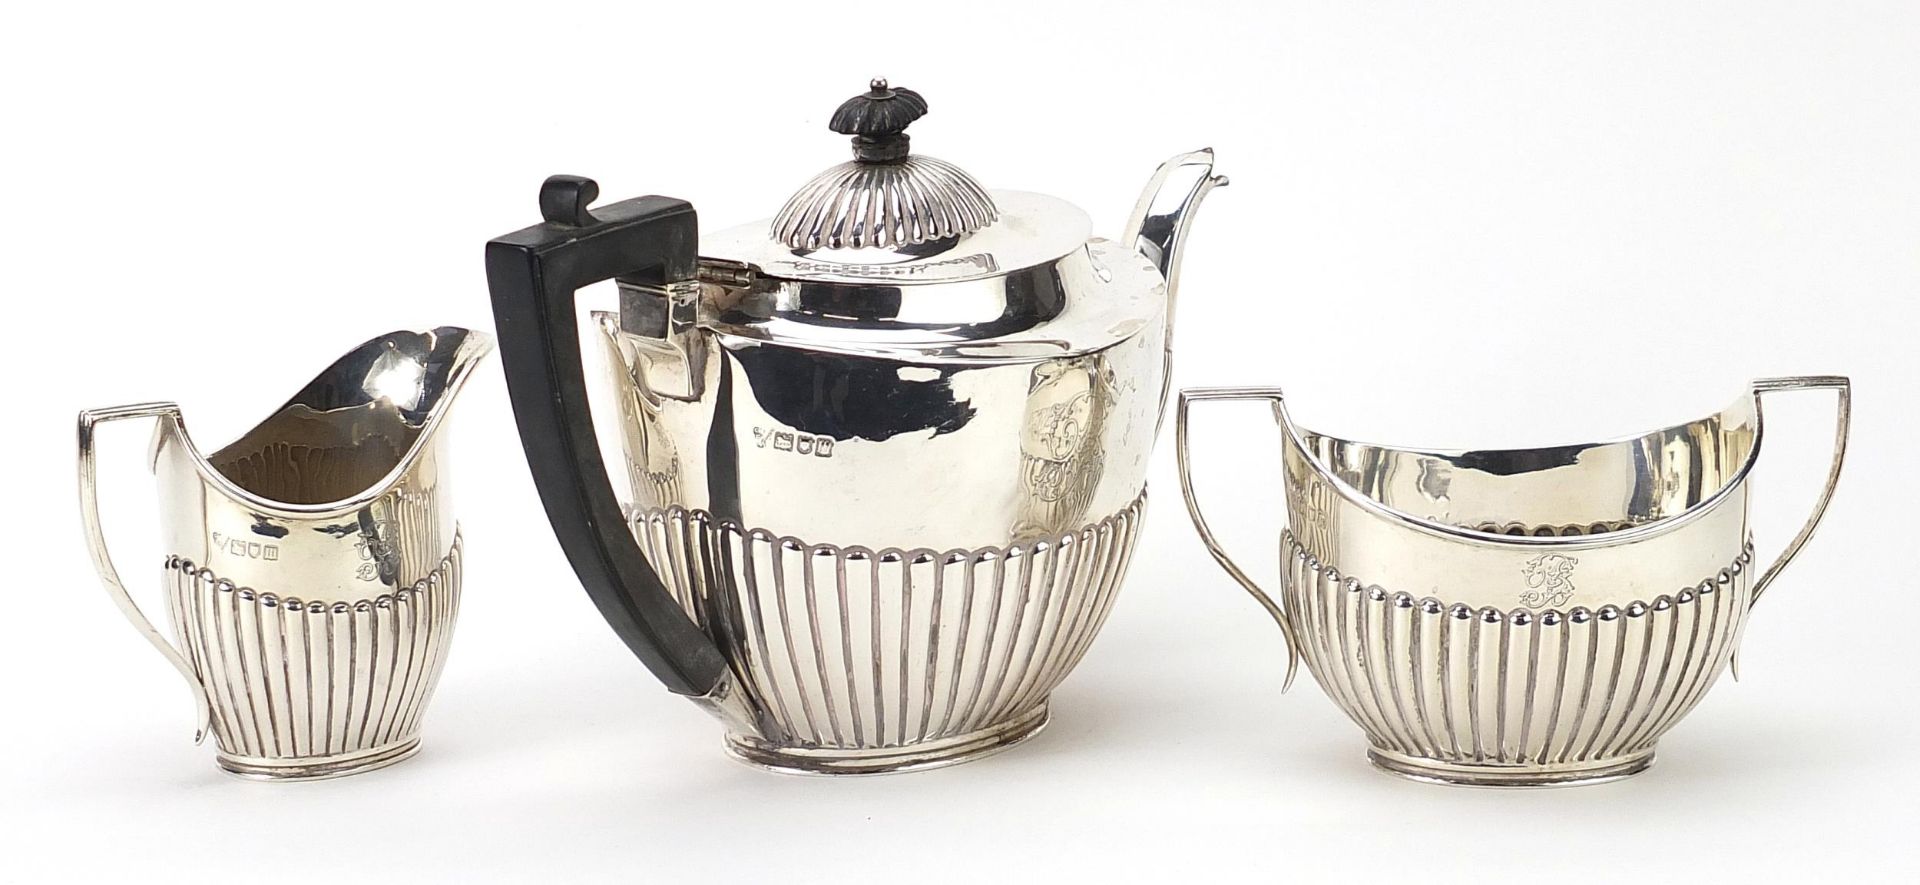 C S Harris & Sons Ltd, Edwardian matched silver three piece demi fluted tea service retailed by - Image 2 of 5